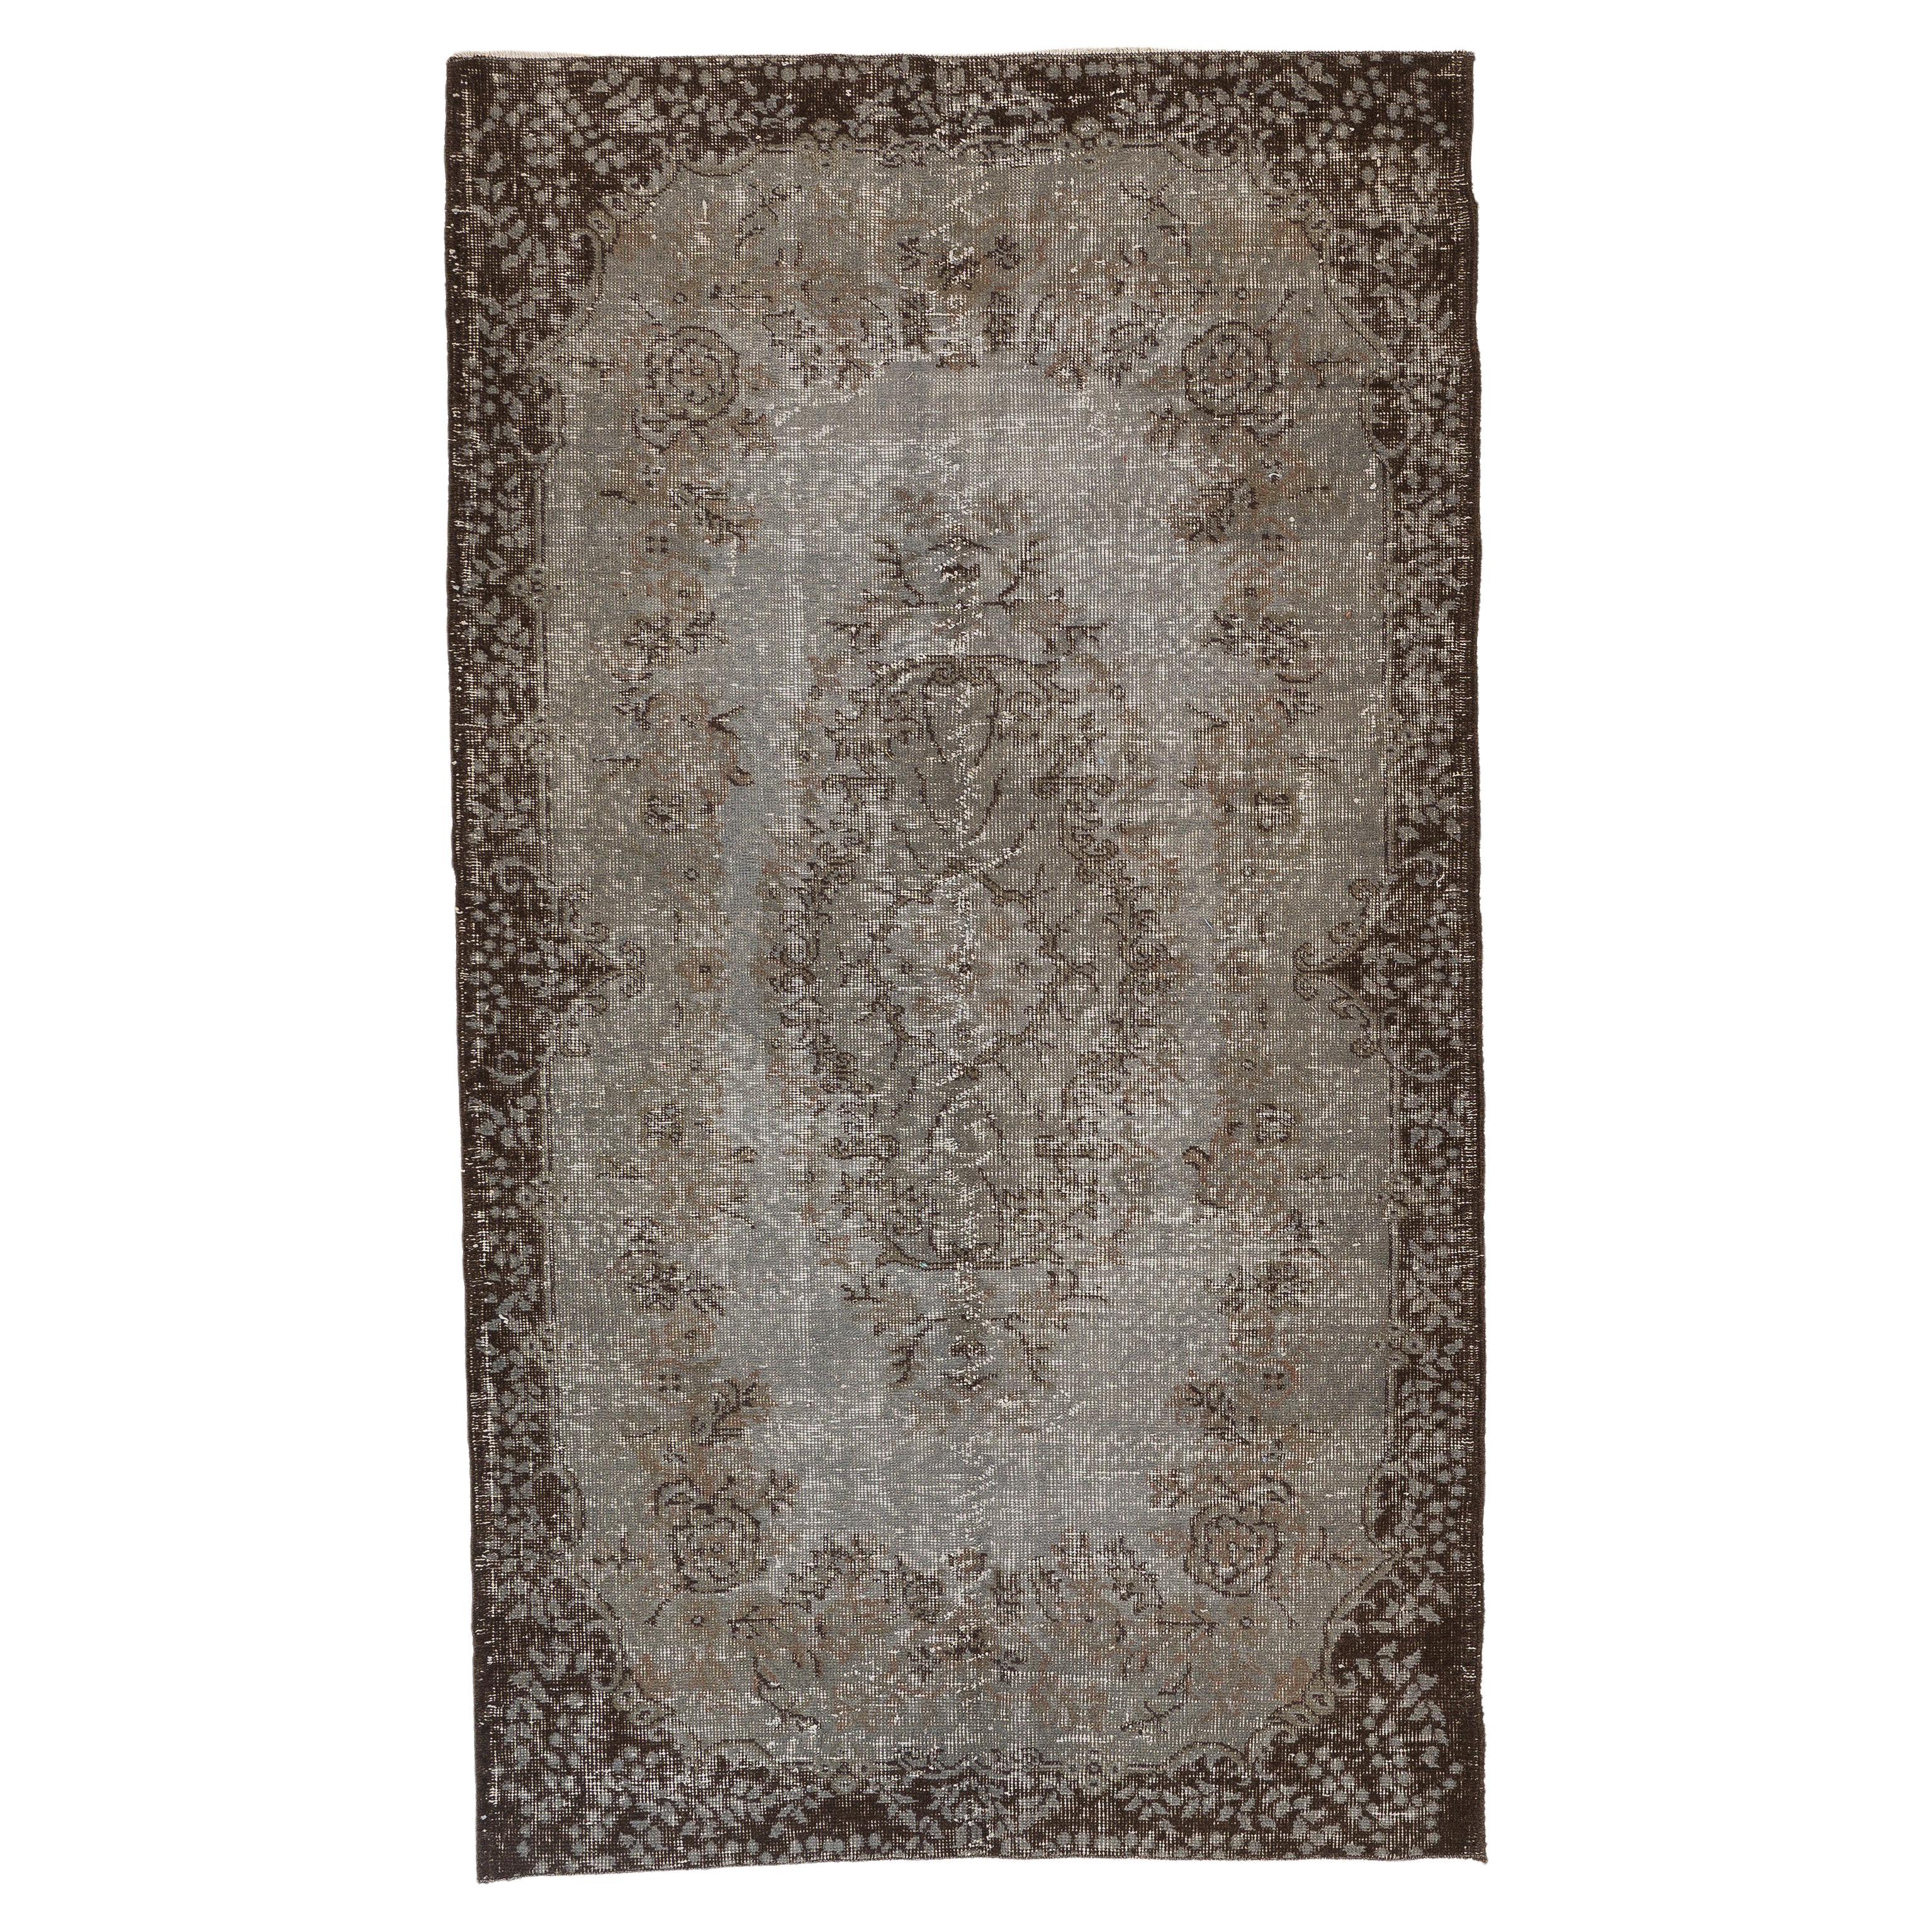 4x7 Ft Vintage Baroque Design Handmade Rug Over-Dyed in Gray Color For Sale